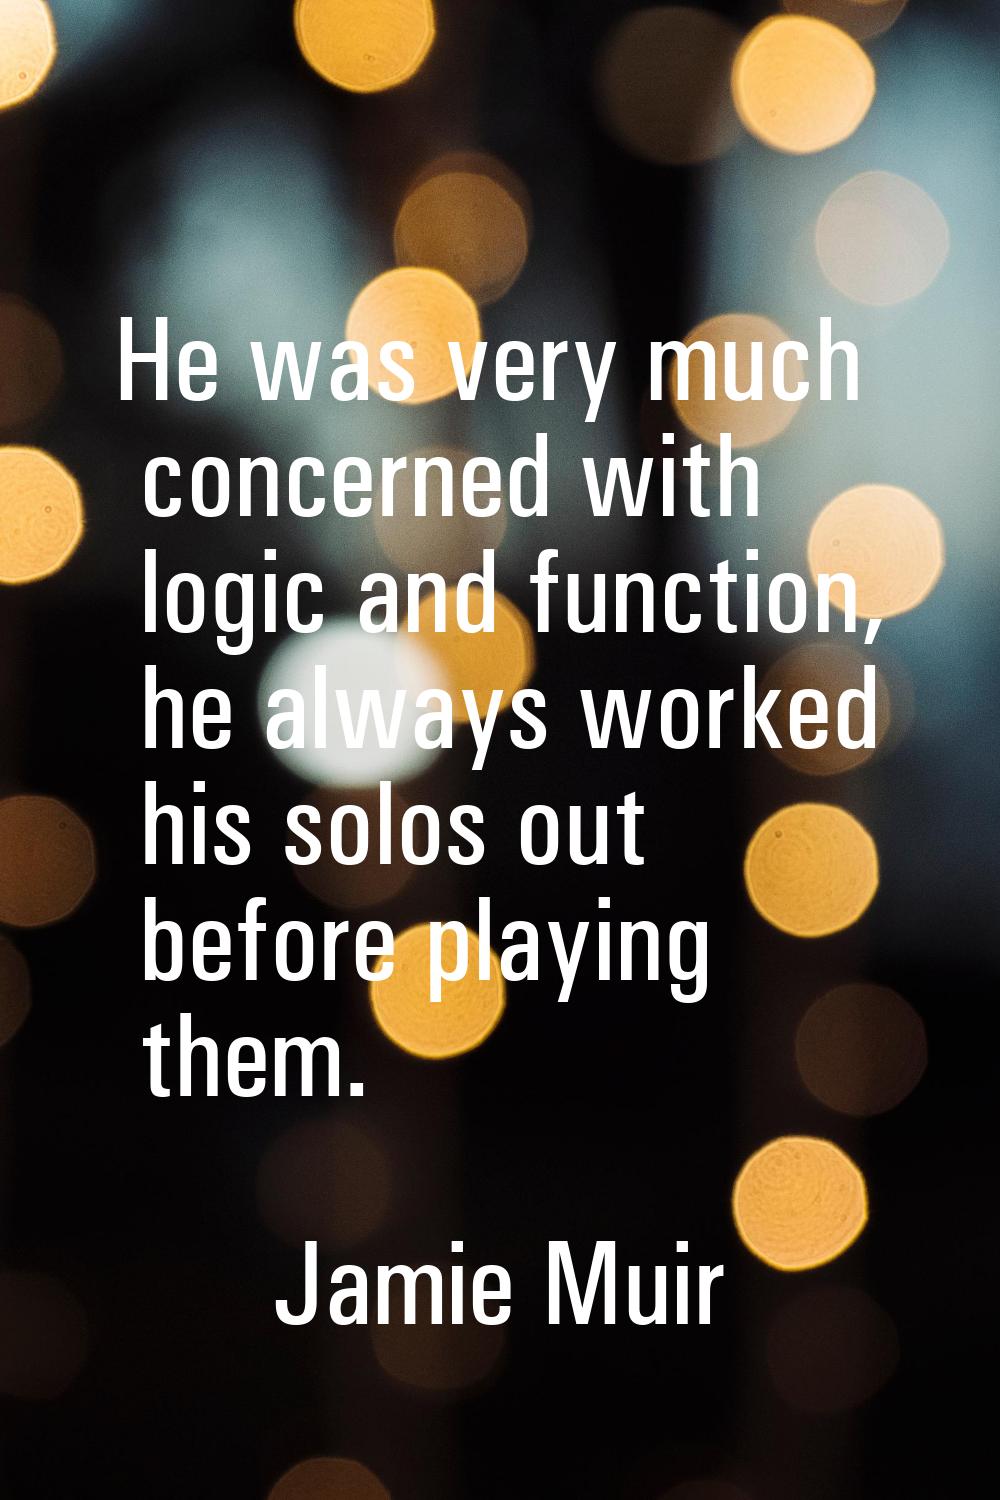 He was very much concerned with logic and function, he always worked his solos out before playing t